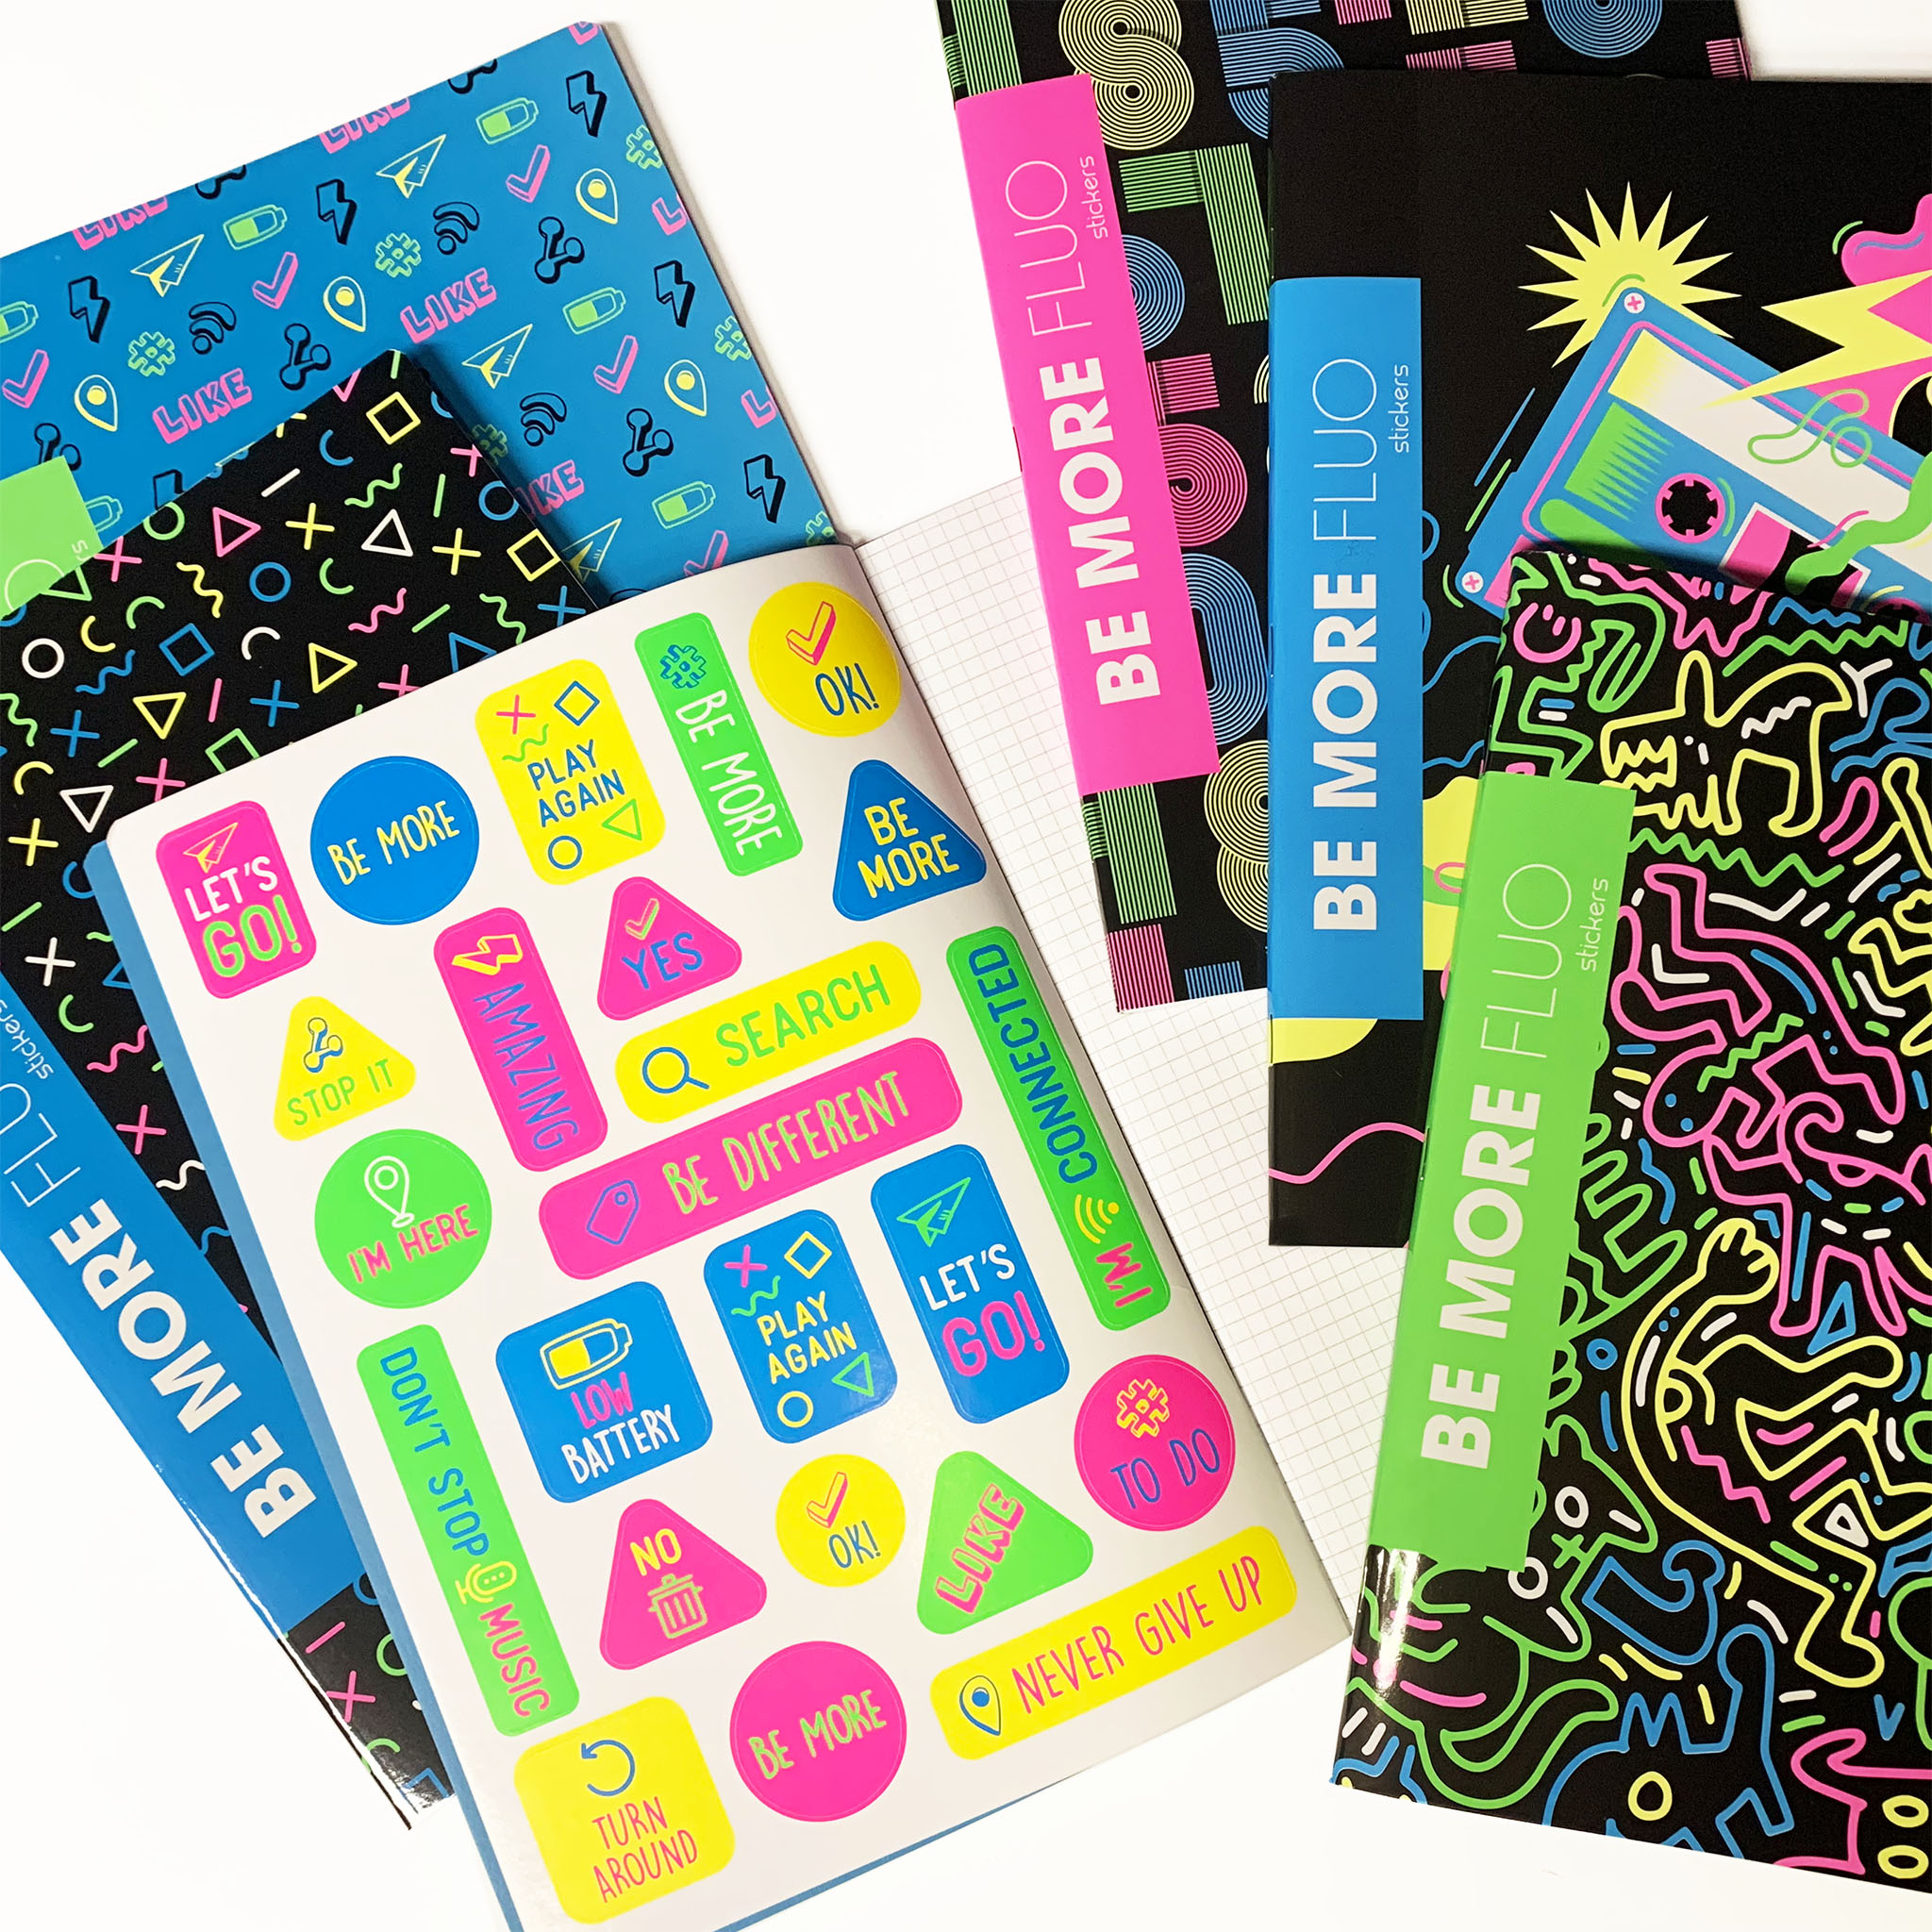 A4 maxi notebooks BE MORE FLUO with stickers 100 gram - 10 assorted pieces